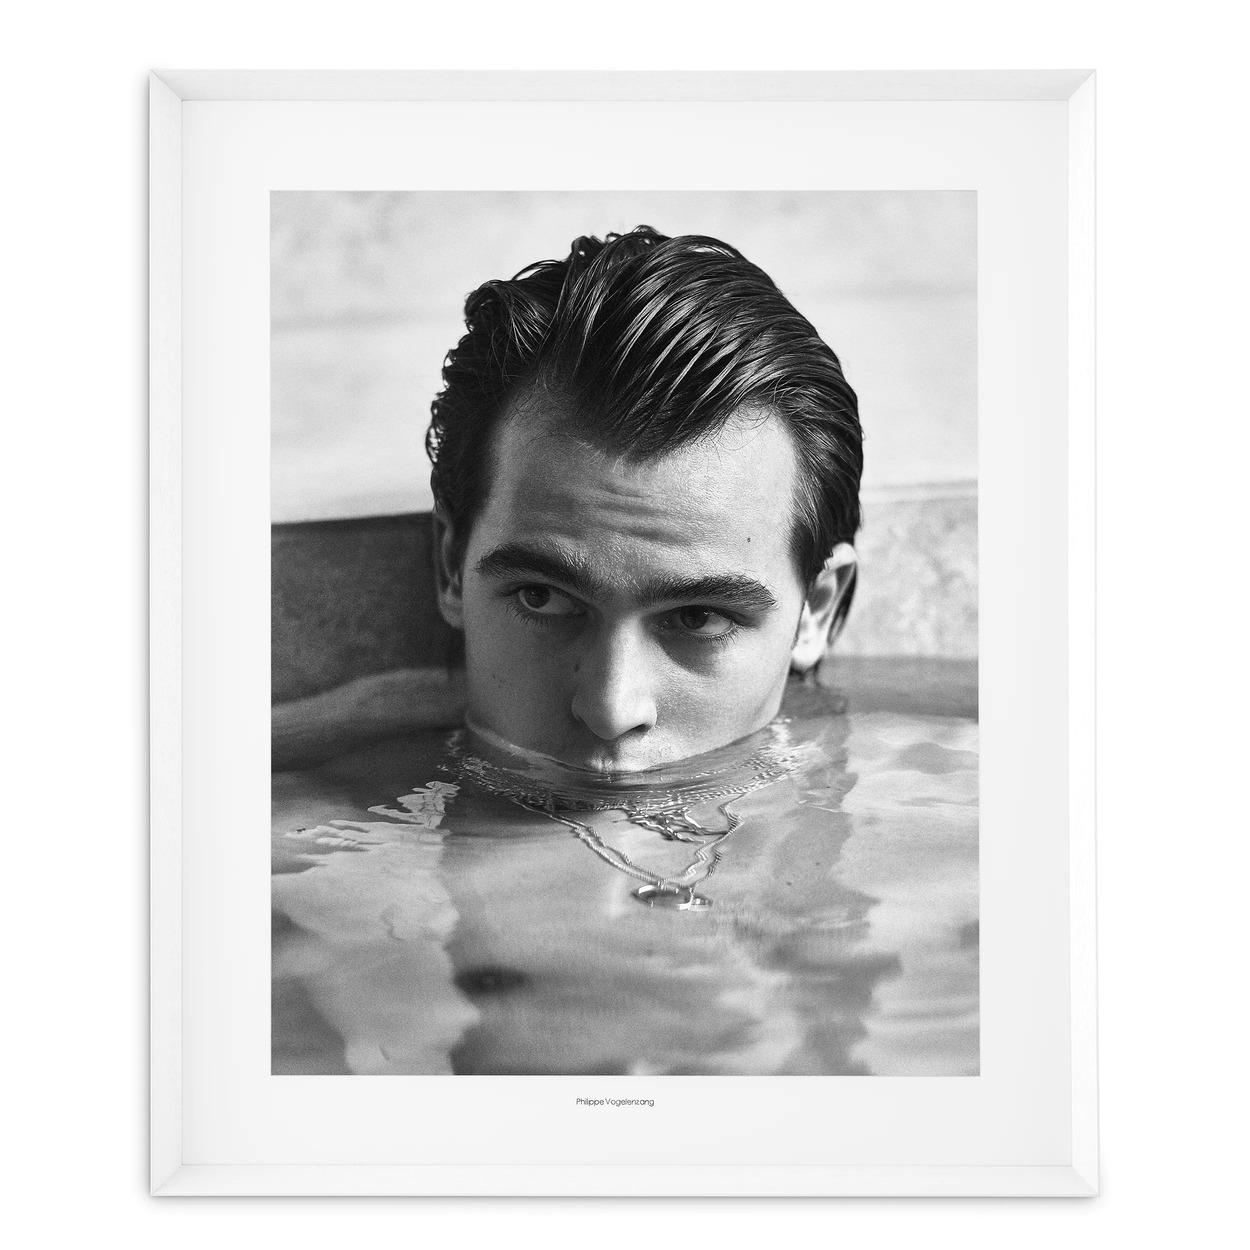 European Print by Philippe Vogelenzang, Bathe For Sale